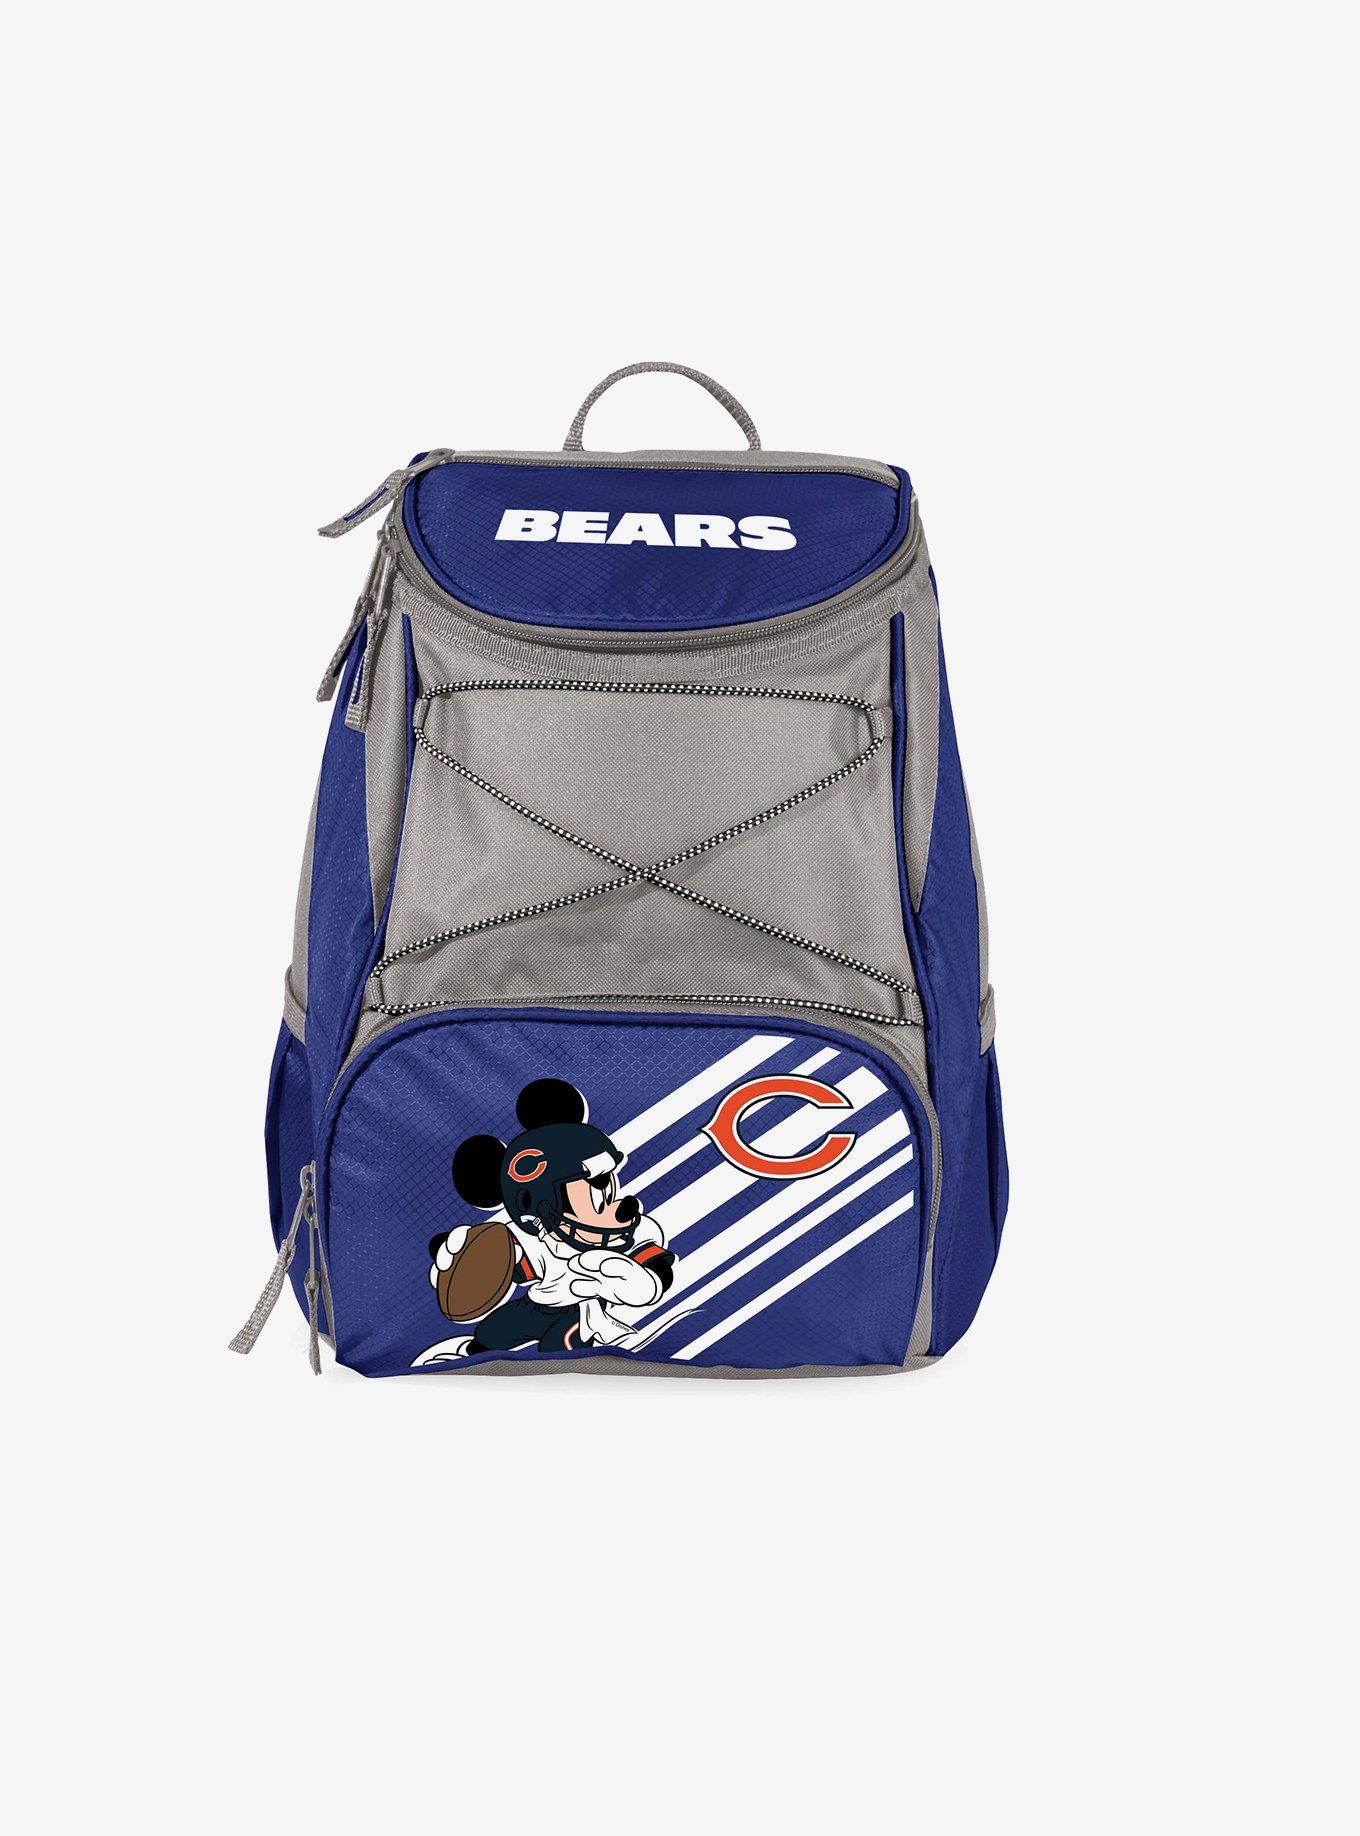 Disney Mickey Mouse NFL Chicago Bears Cooler Backpack